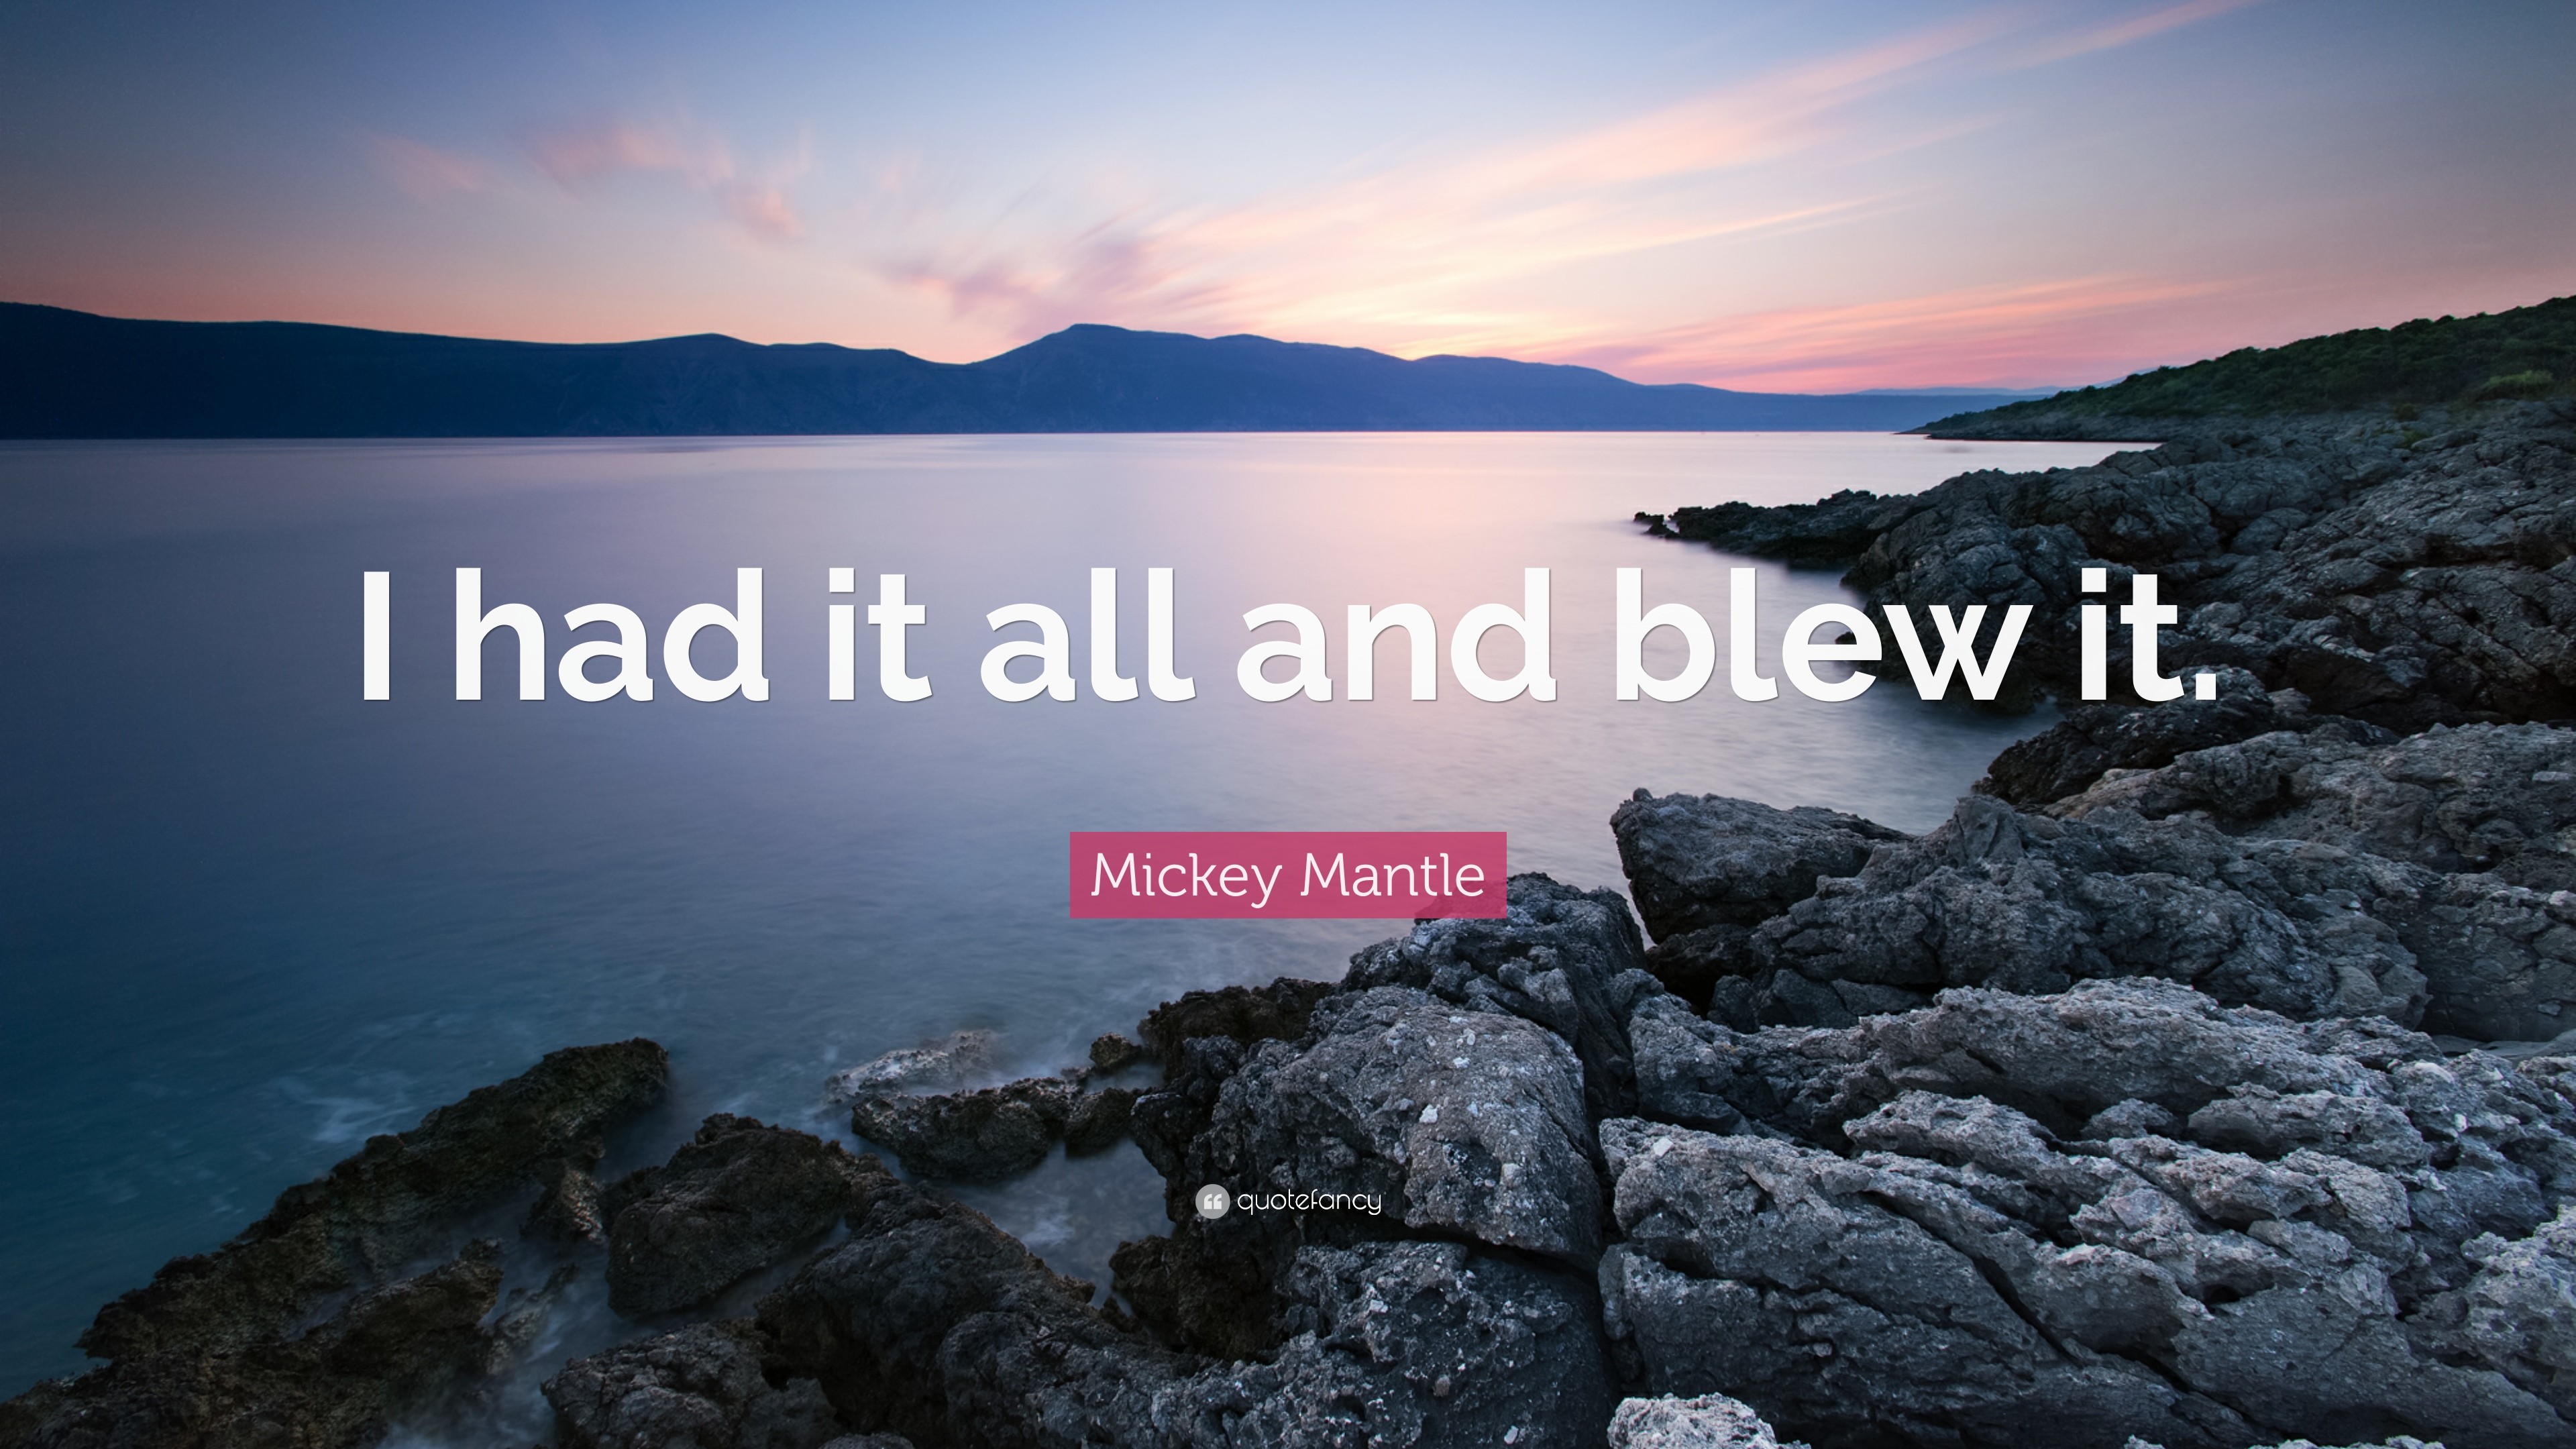 Mickey Mantle Quote I had it all and blew it.